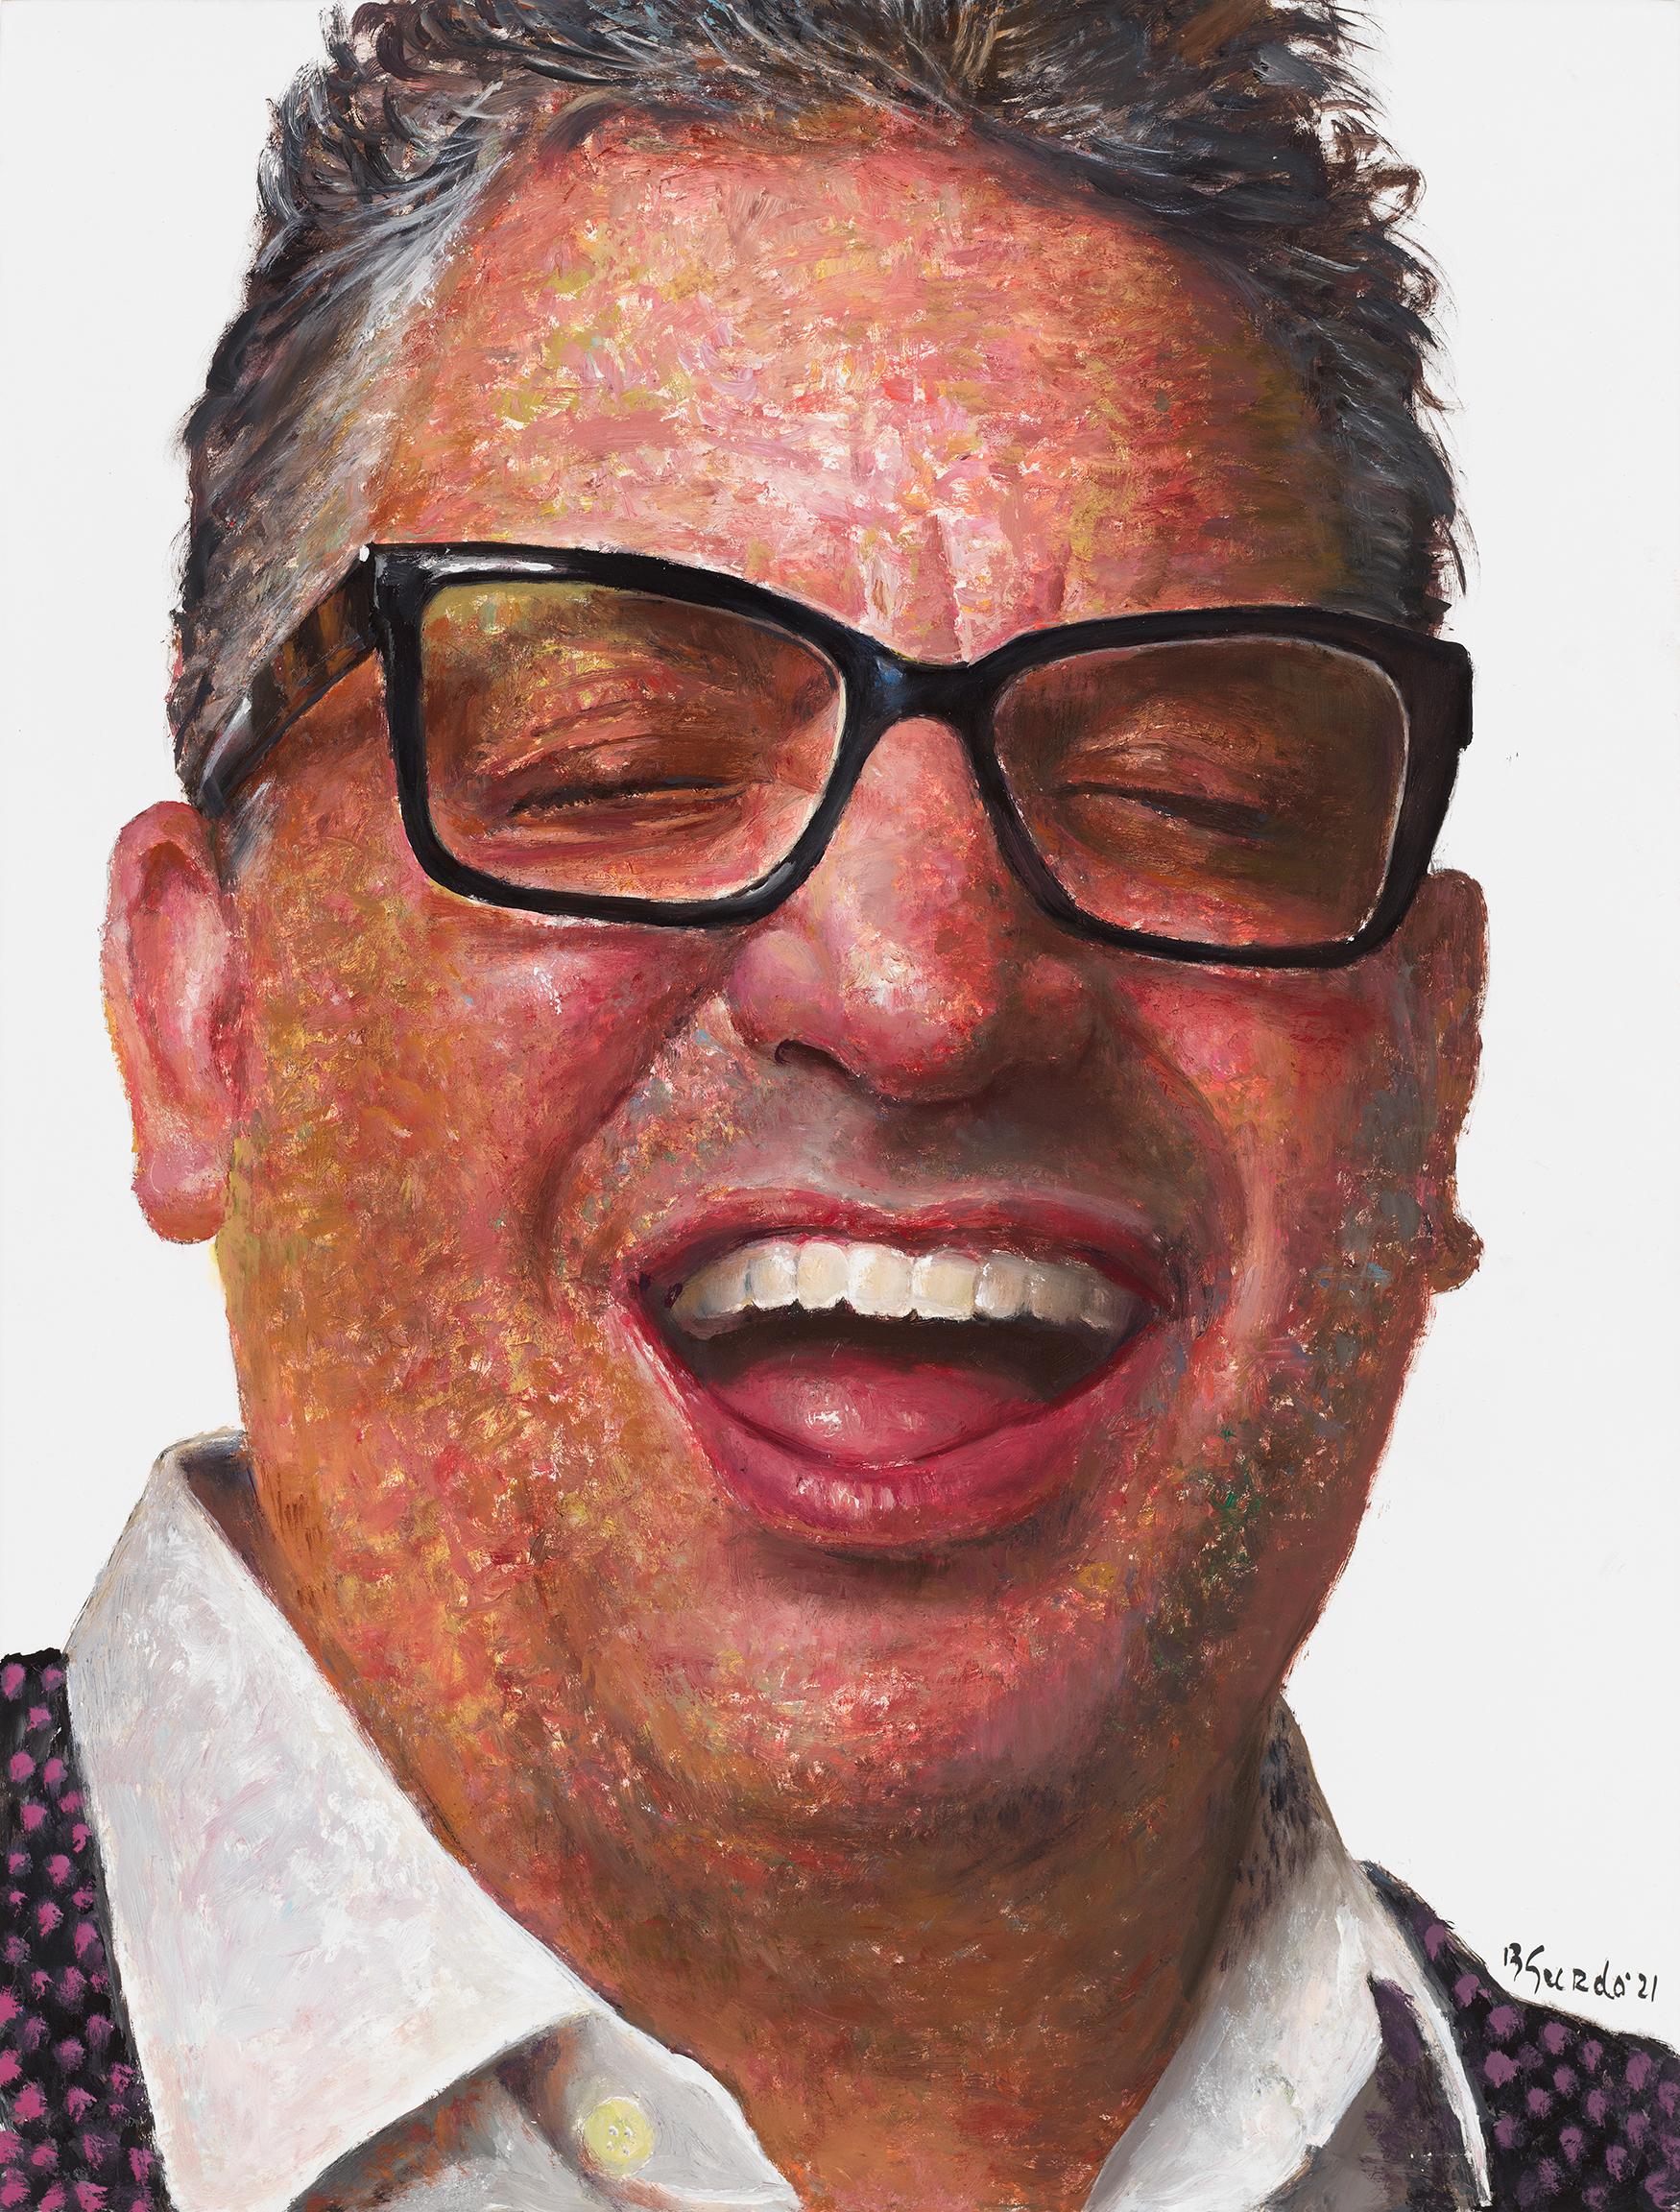 Bruno Surdo Portrait Painting - What's So Funny? - Portrait of Laughing Man, Original Oil on Canvas